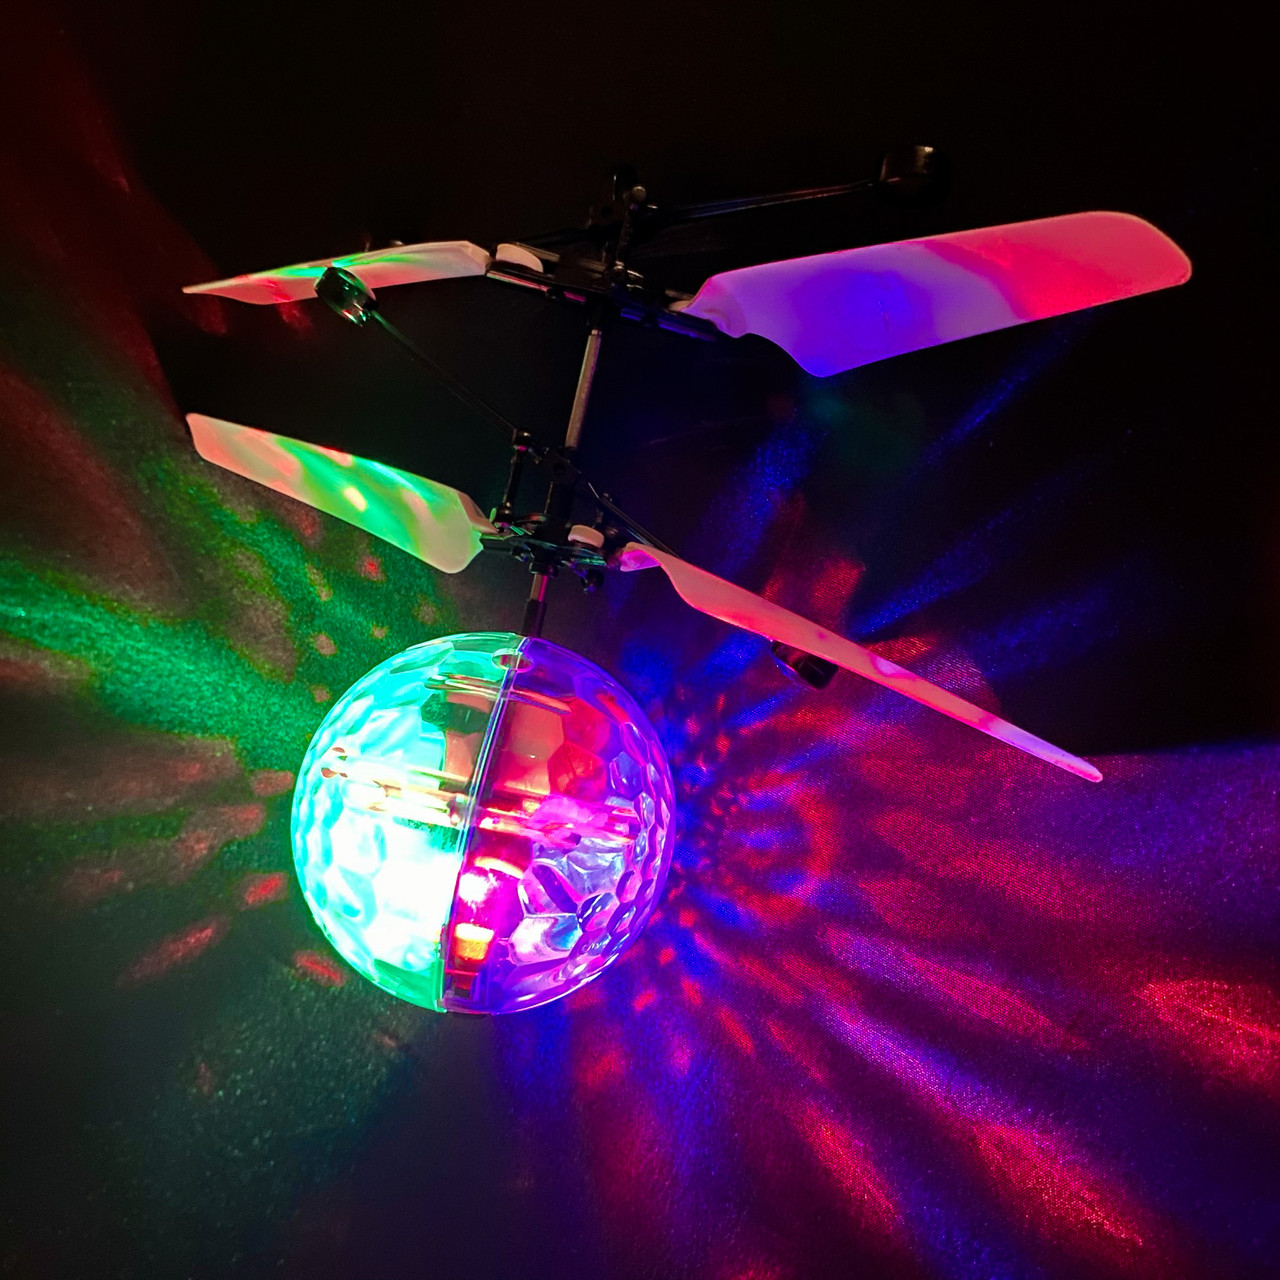 https://cdn11.bigcommerce.com/s-t3aq9bcqq7/images/stencil/1280x1280/products/1658/4079/LED_TOY_HOVER_BALL_5__47143.1616541678.jpg?c=2